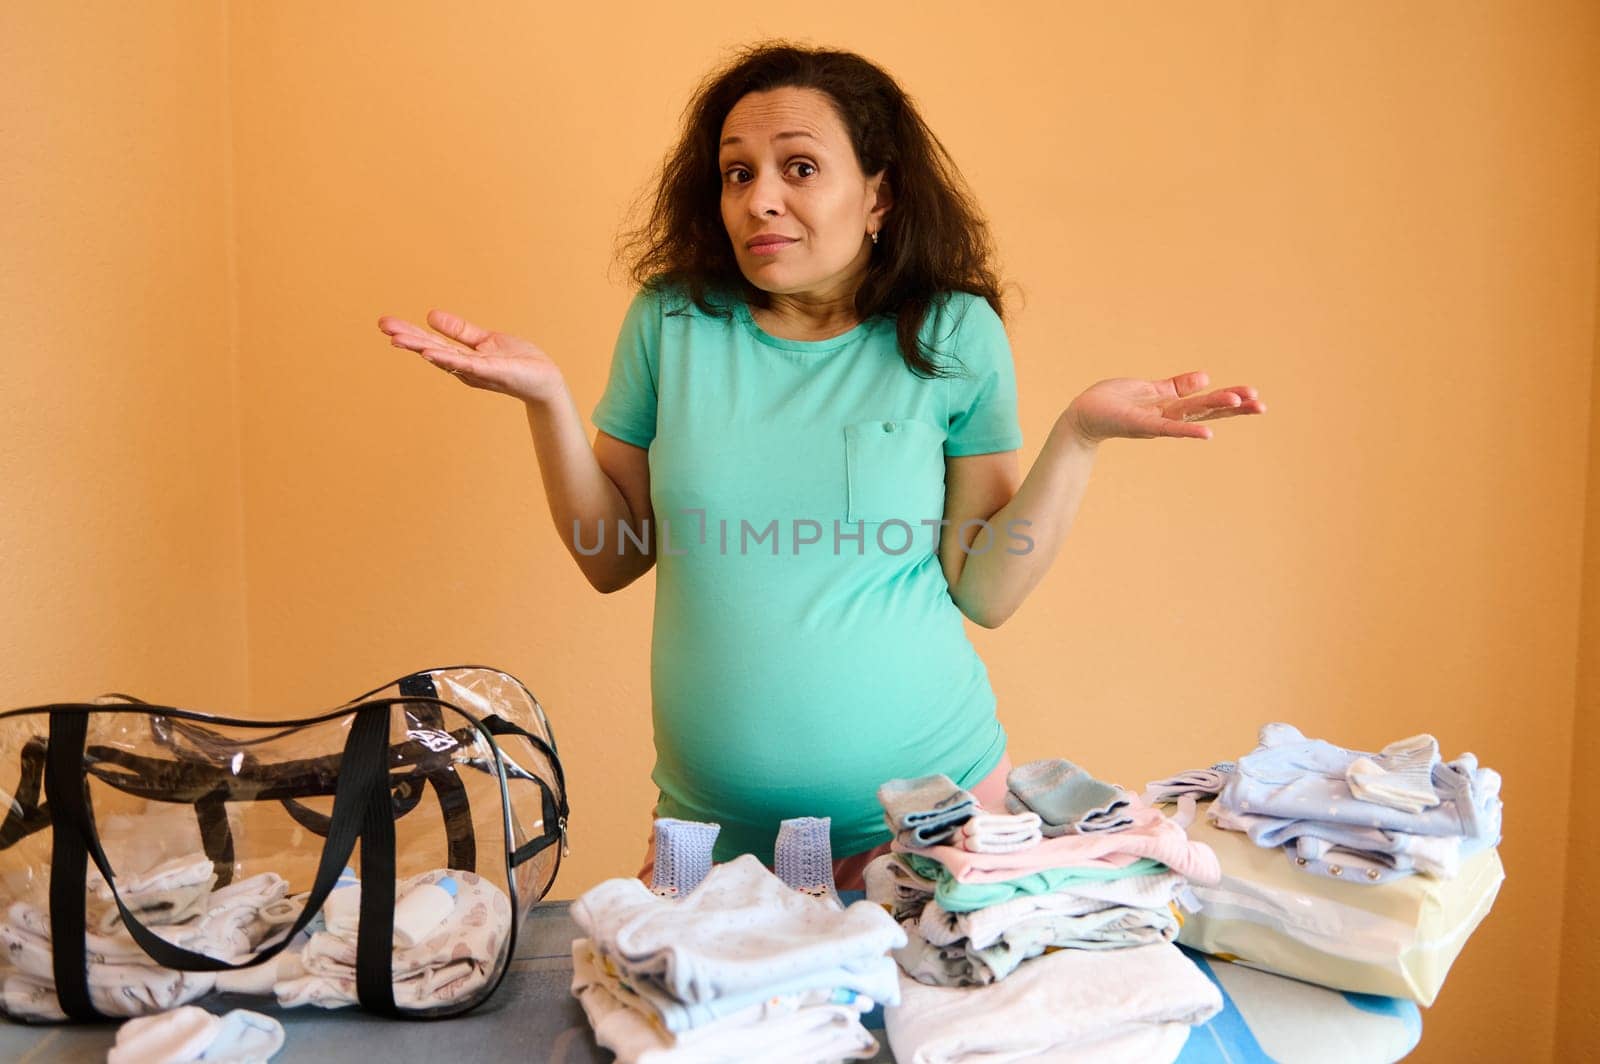 Surprised pregnant woman holding hands palms up, looks at camera, asking what to pack into a bag for maternity hospital by artgf